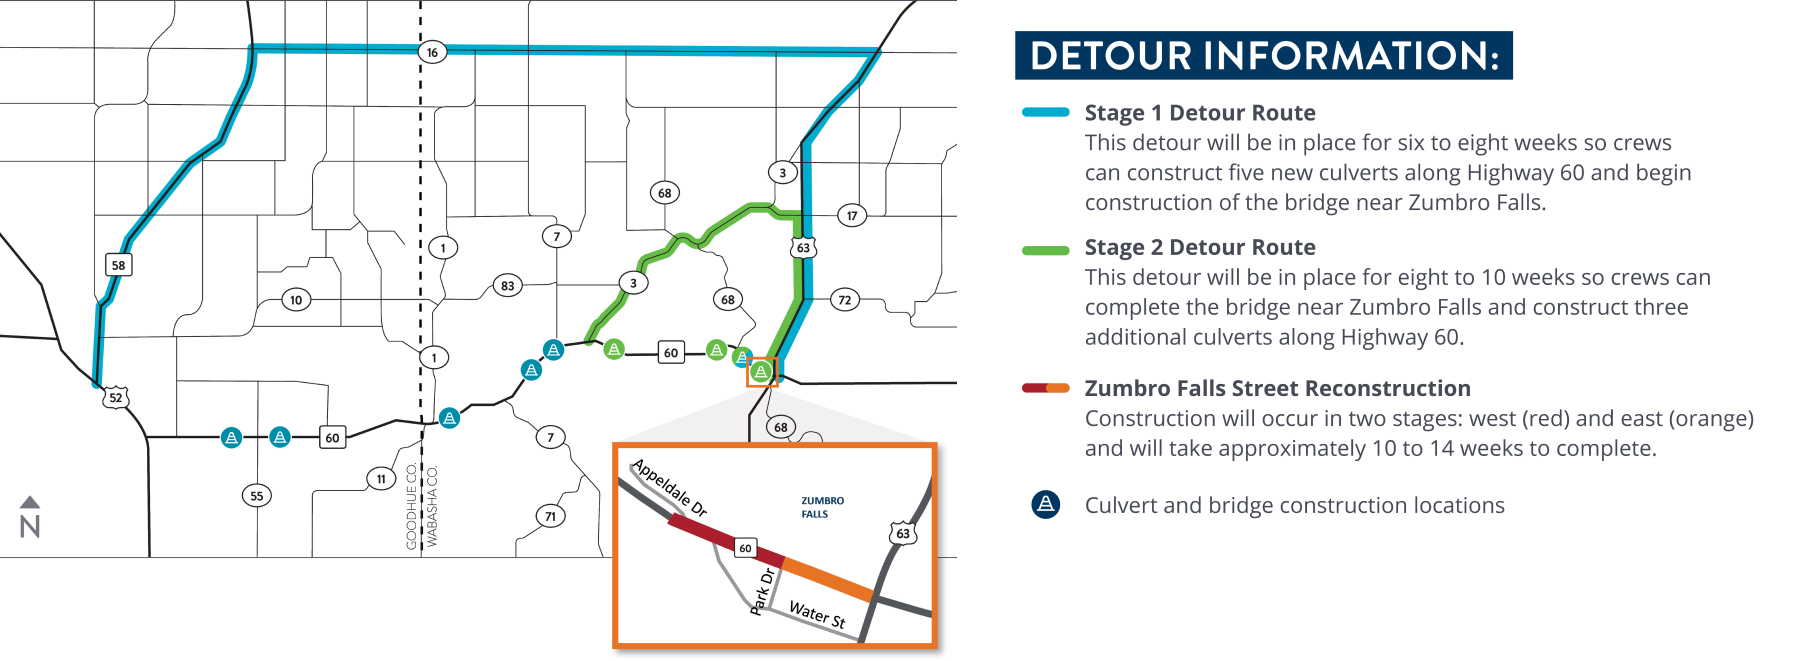 Stage 1 Detour Route is in place for six to eight weeks so crews can construct five new culverts along Highway 60 and begin construction of the bridge near zumbro falls. Stage 2 detour route will be in place for eight to 10 weeks so crews can complete the bridge near zumbro falls and construct three additional culverts along highway 60. Zumbro falls street reconstruction will occur in two stages. One, the west indicated in red and two, the east indicated in orange. they will take appoximately ten to fourteen weeks to complete. Culvert and bridge construction locations along highway 60 are indicated with a safety cone, nine in total.